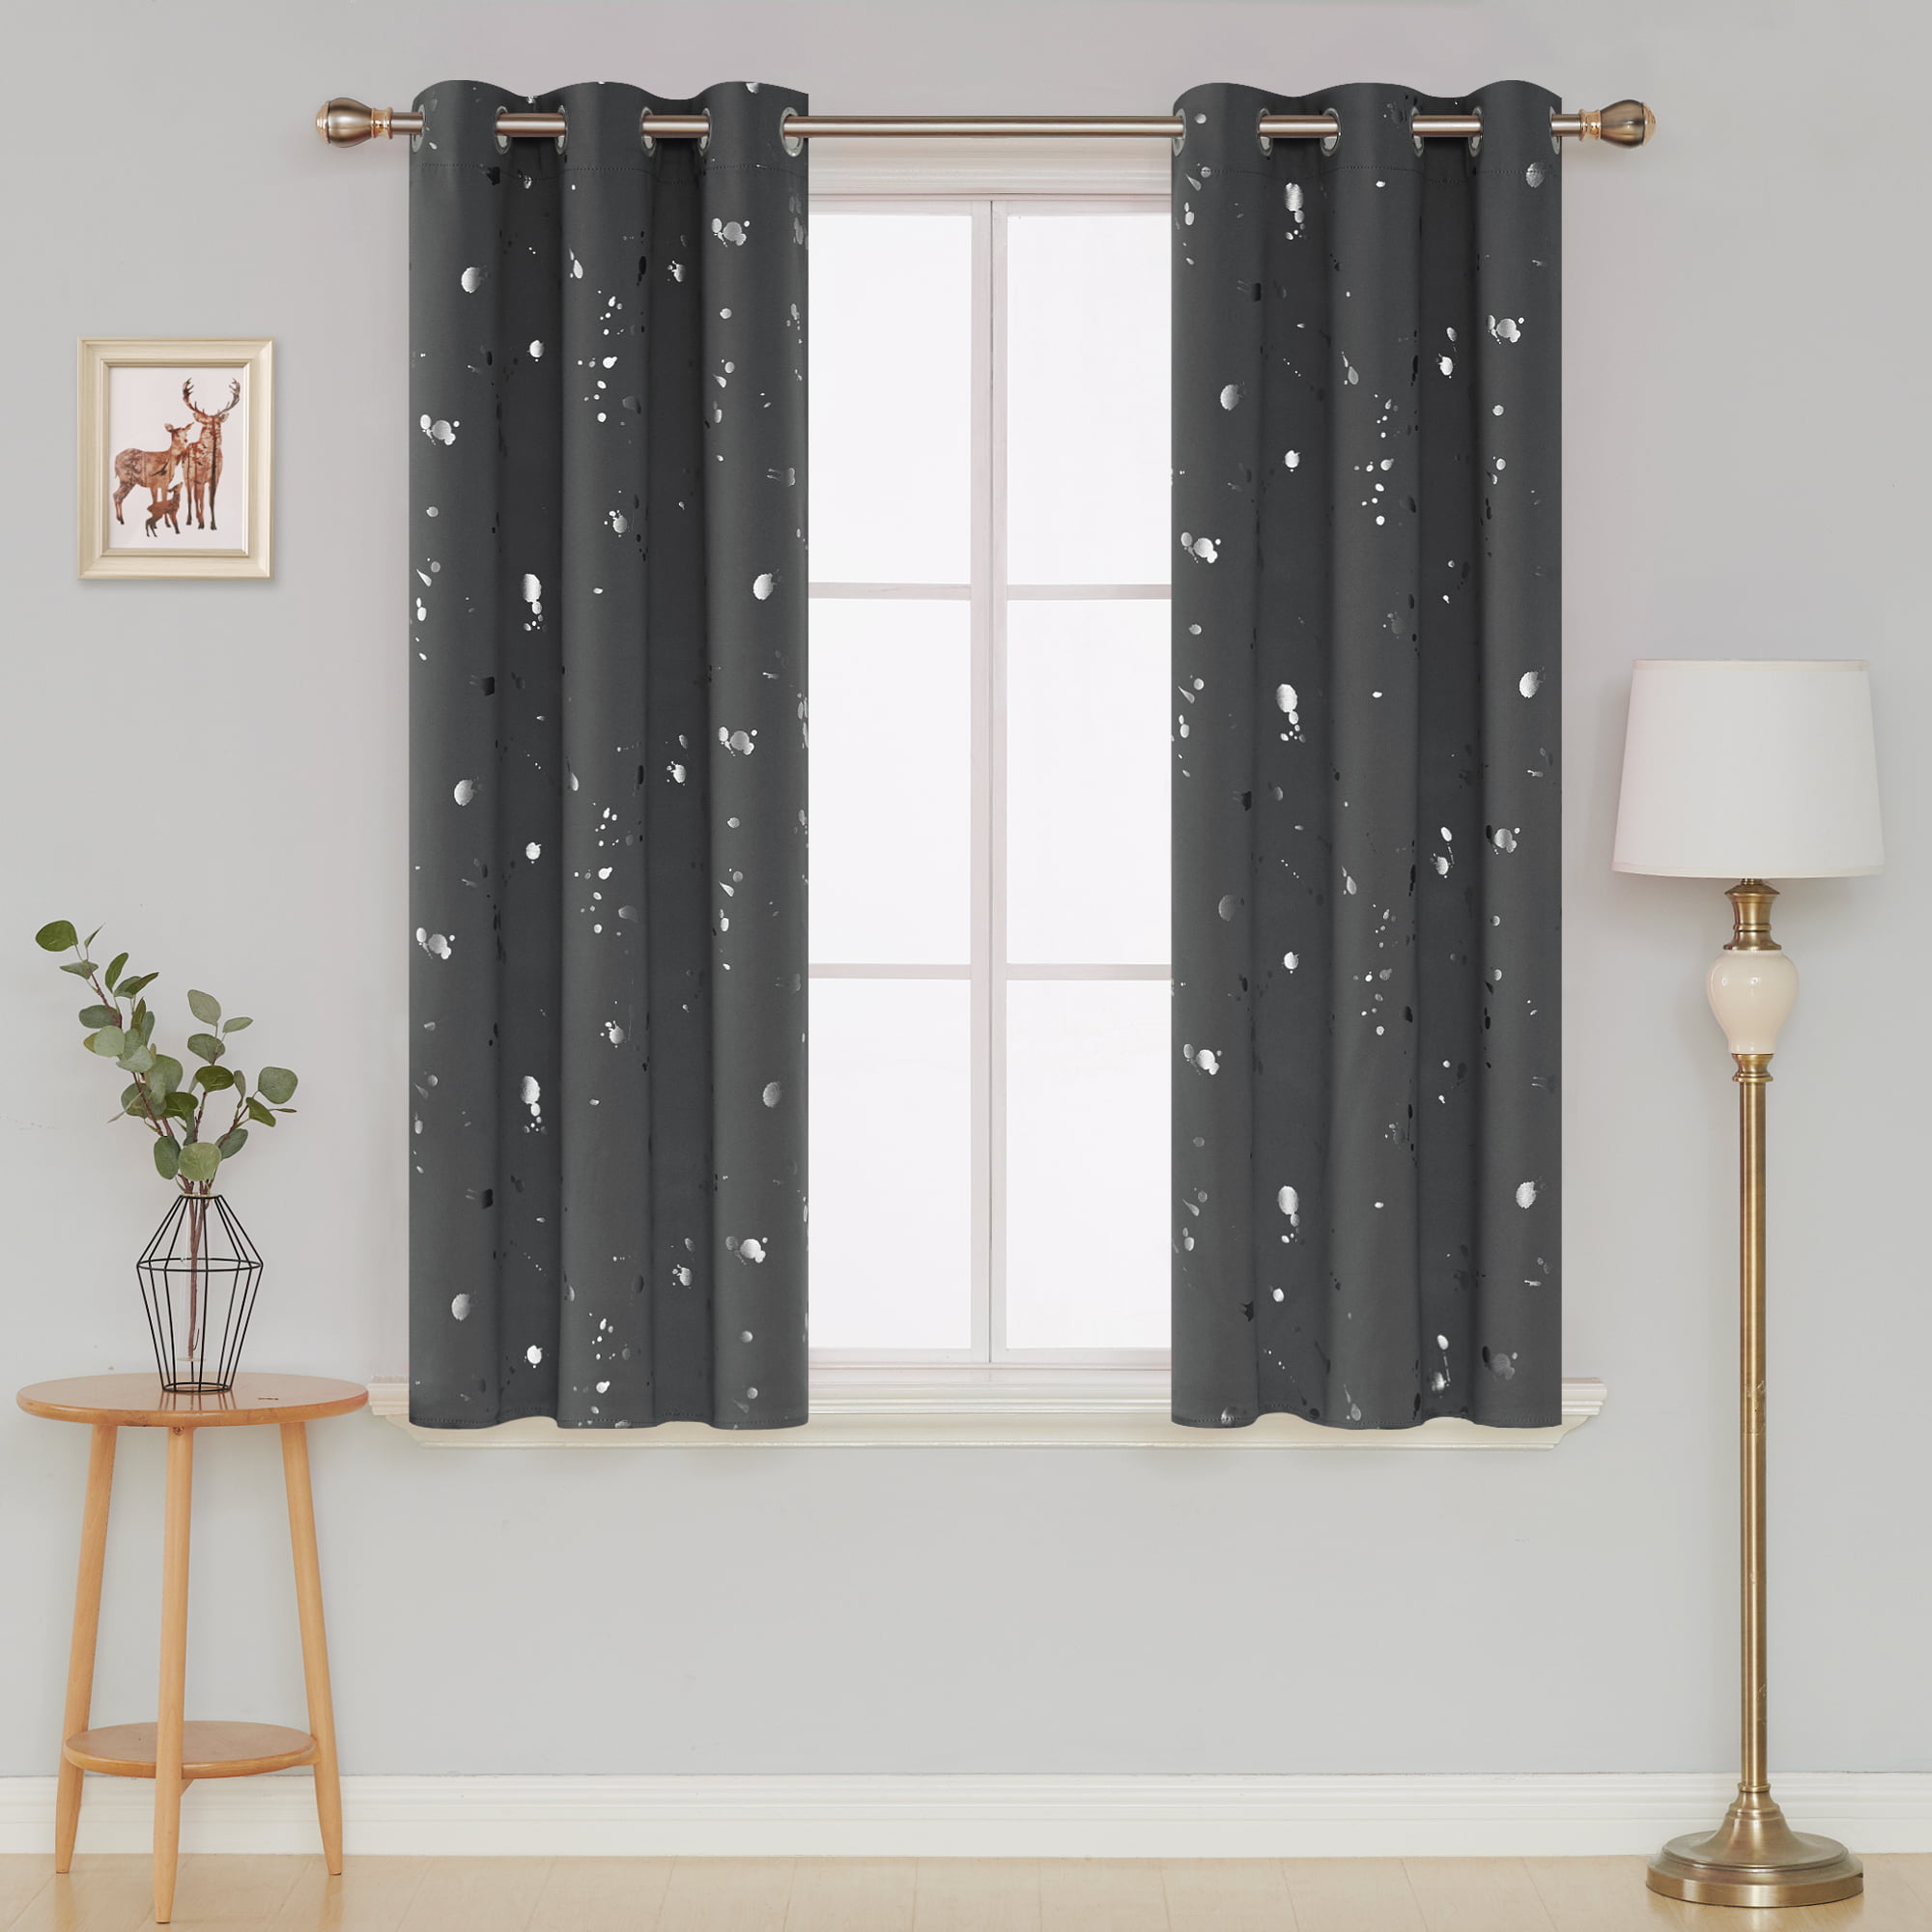 Deconovo Super Soft Thermal Insulated Star Foil Printed Eyelet Blackout Curtains 